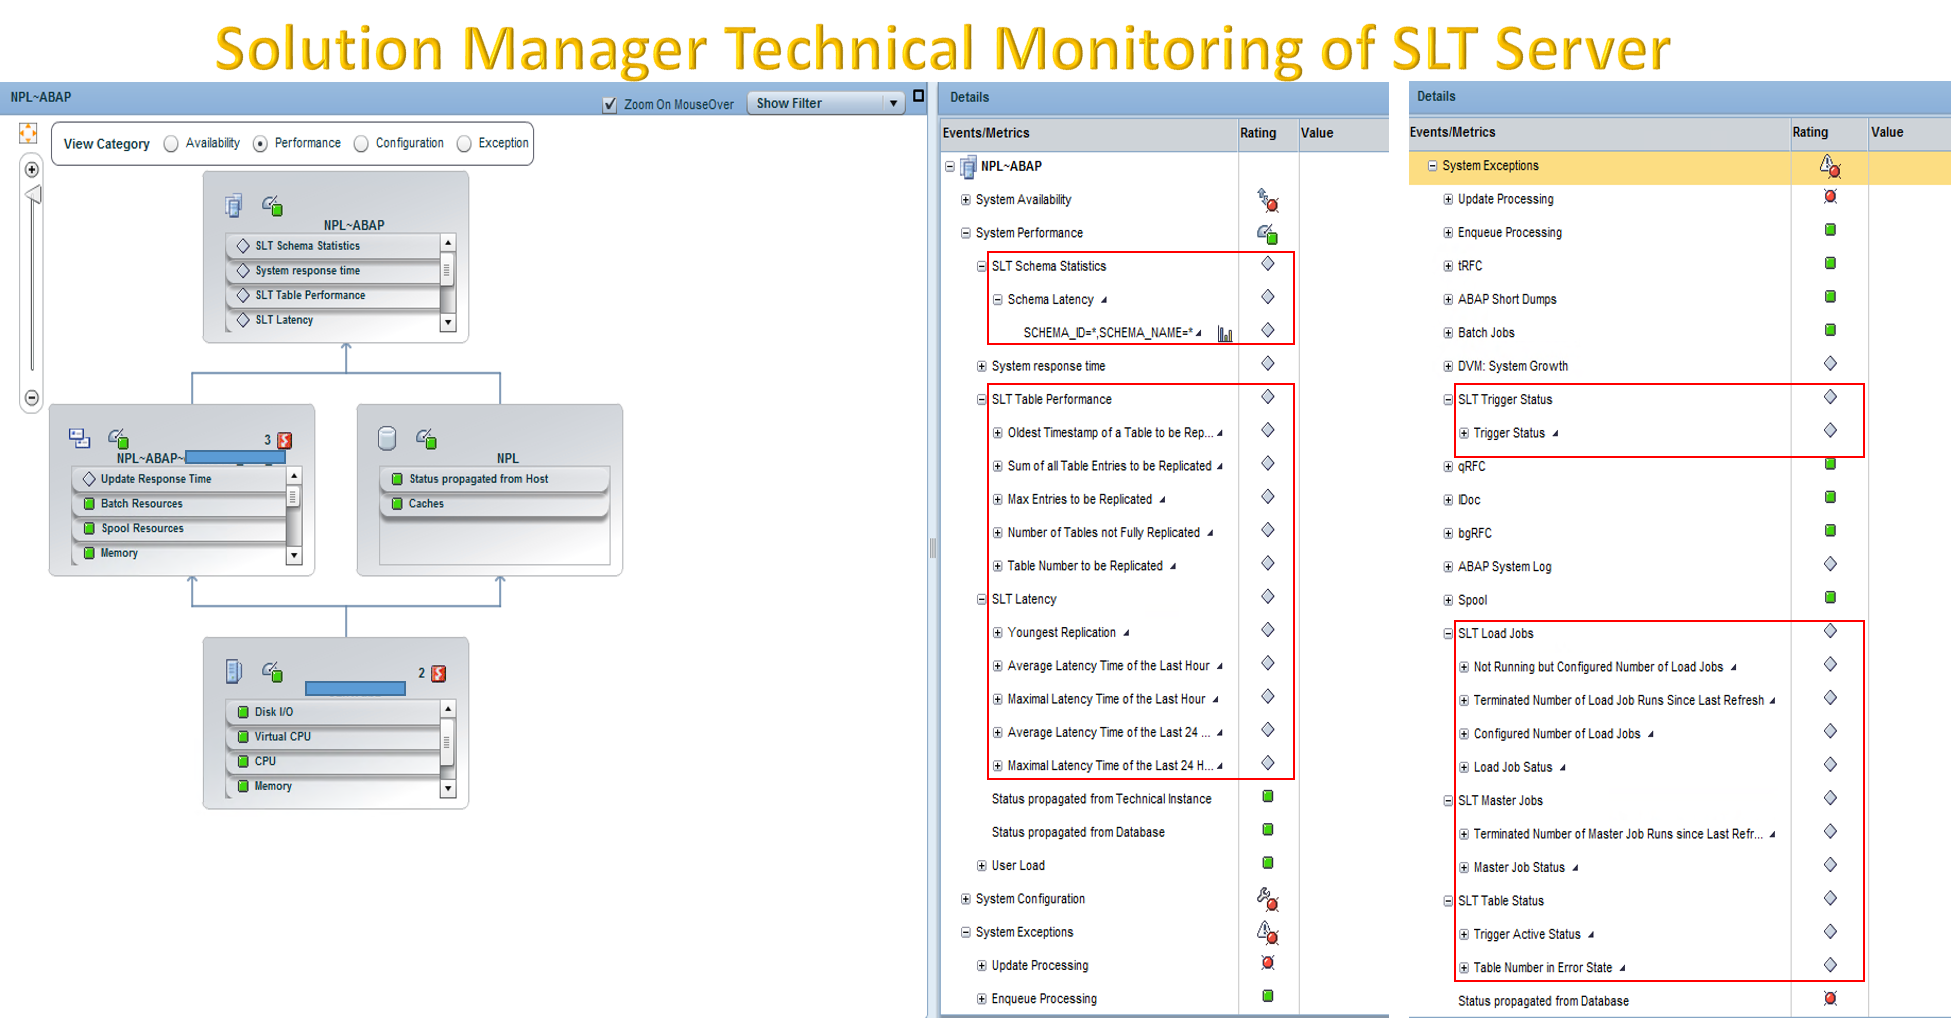 Solution Manager Technical Monitoring of SLT Server